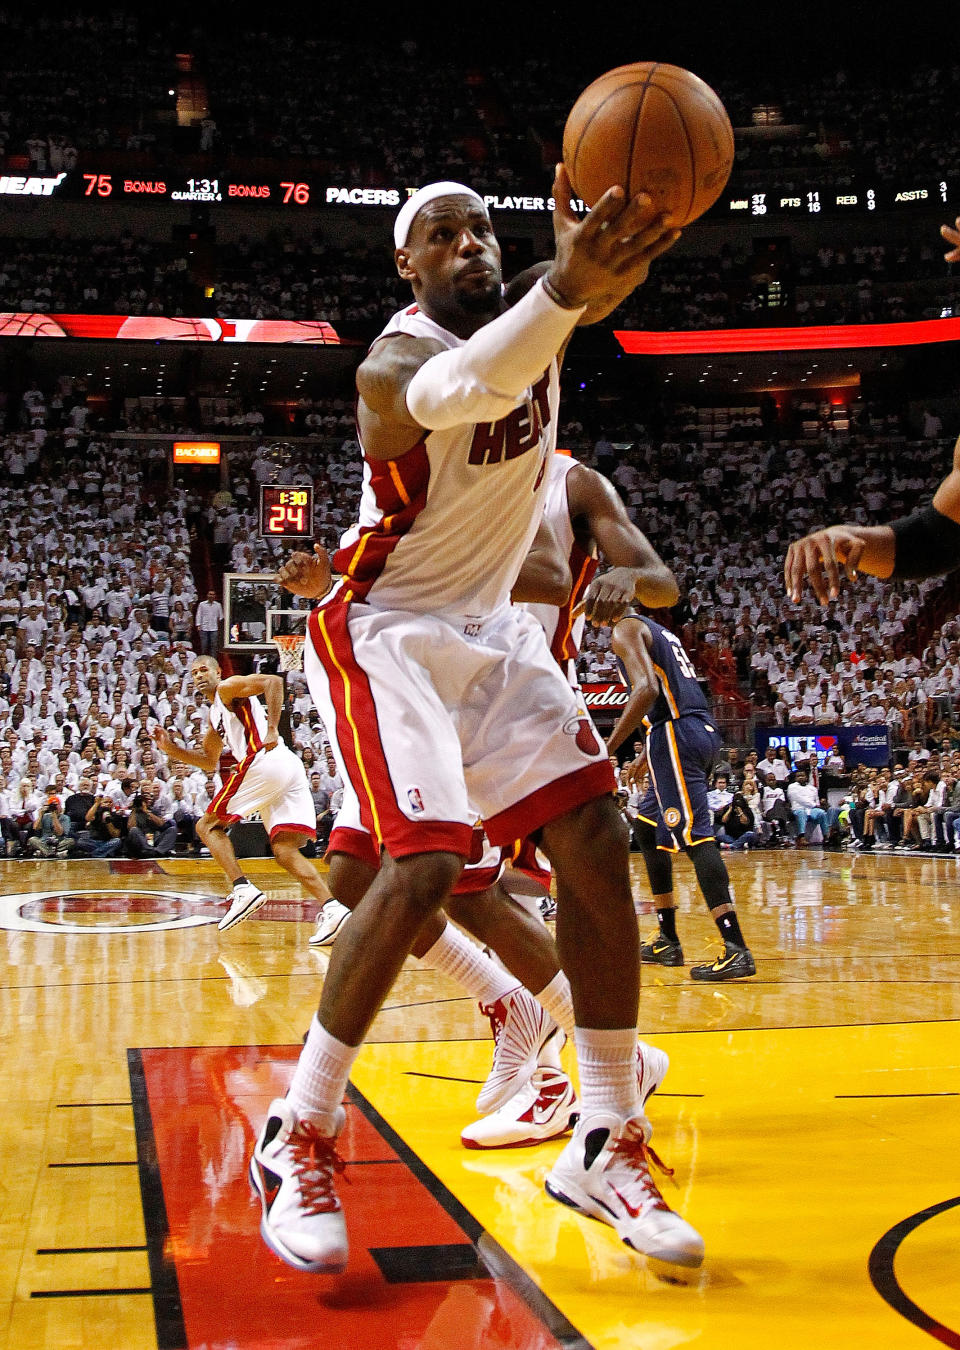 MIAMI, FL - MAY 15: LeBron James #6 of the Miami Heat rebounds the ball during Game Two of the Eastern Conference Semifinals in the 2012 NBA Playoffs against the Indiana Pacers at AmericanAirlines Arena on May 15, 2012 in Miami, Florida.